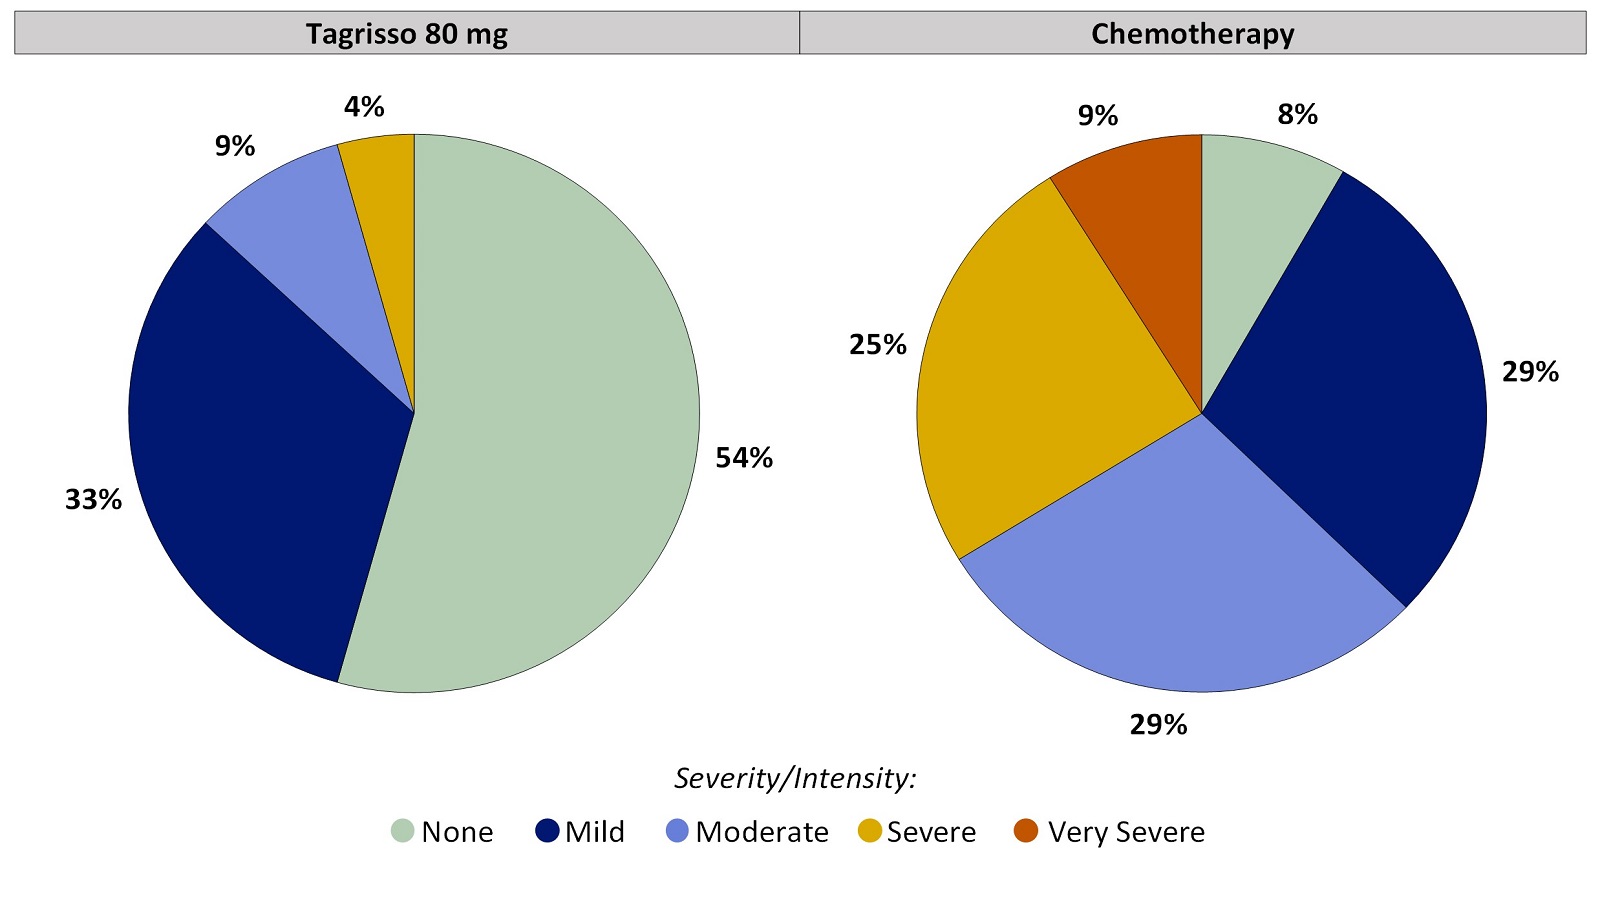 Two pie charts, one for Tagrisso and the other for chemotherapy, which includes only those patients who had no constipation before treatment. The pie charts summarize the percentage of patients by worst reported constipation. In the Tagrisso arm, None (54%), Mild (33%), Moderate (9%), Severe (4%), and Very severe (0%). In the chemotherapy arm, None (8%), Mild (29%), Moderate (29%), Severe (25%) and Very severe (9%).